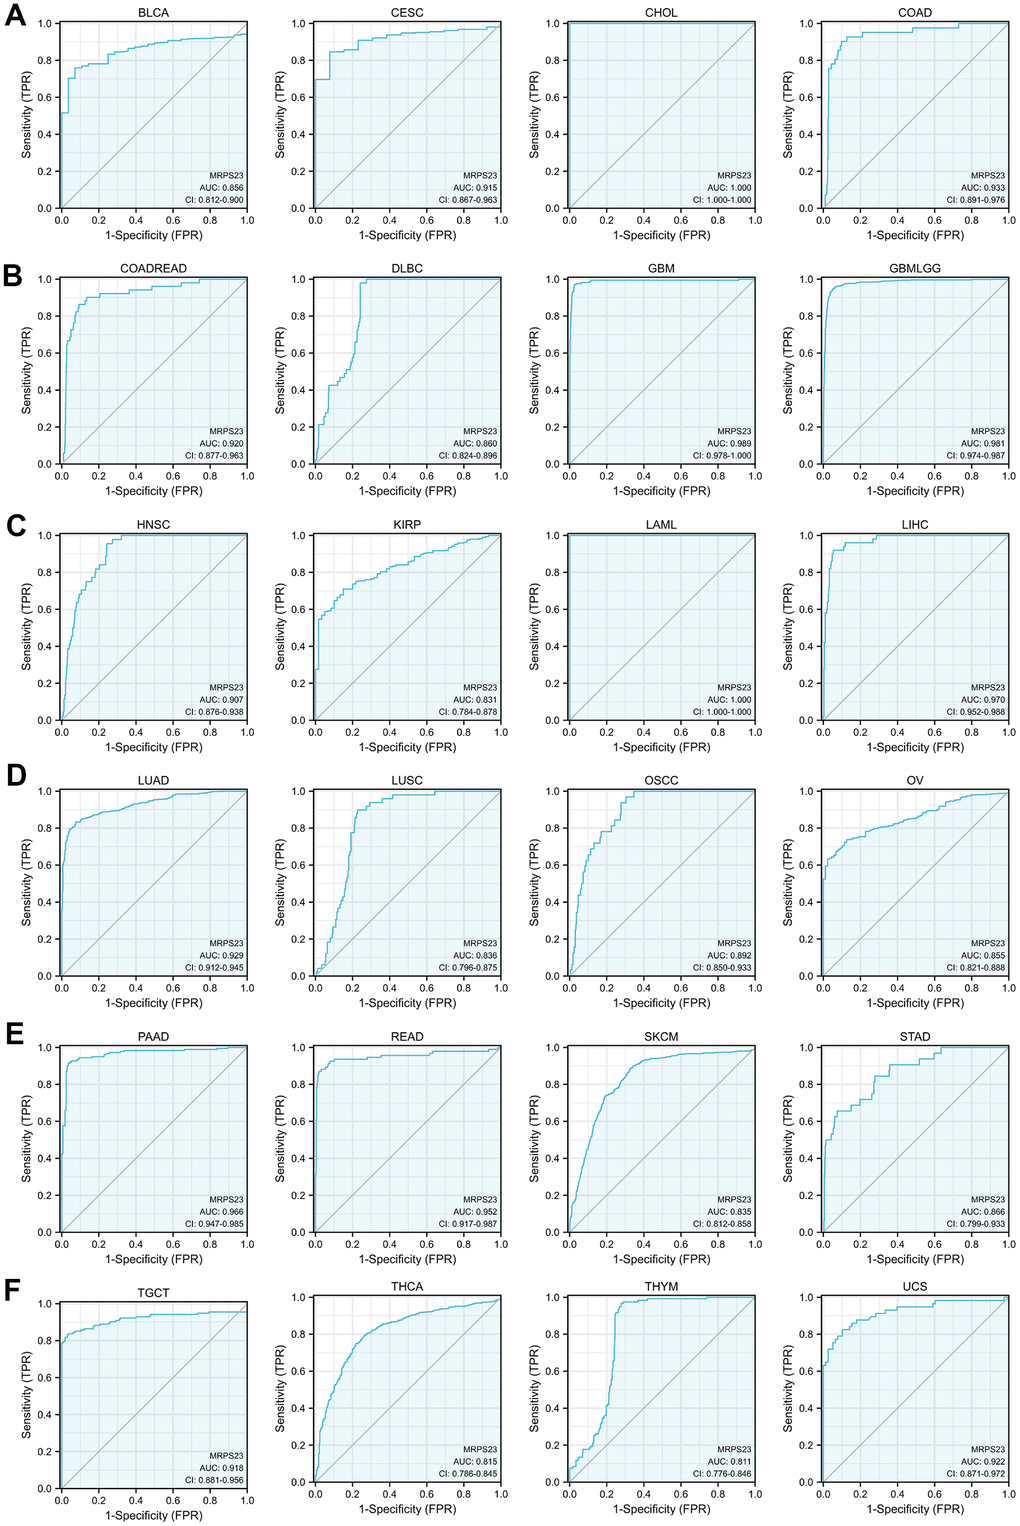 MRPS23 may act as a potential biomarker in pan-cancer. Predictive power for prognosis with MRPS23 expression by ROC curve analysis in BLCA, CESC, CHOL, and COAD (A); COADREAD, DLBC, GBM, and glioma (B); HNSC, KIRP, LAML, and LIHC (C); LUAD, LUSC, OSCC, and OV (D); PAAD, READ, SKCM, and STAD (E), TGCT, THCA, THYM, and UCS (F).